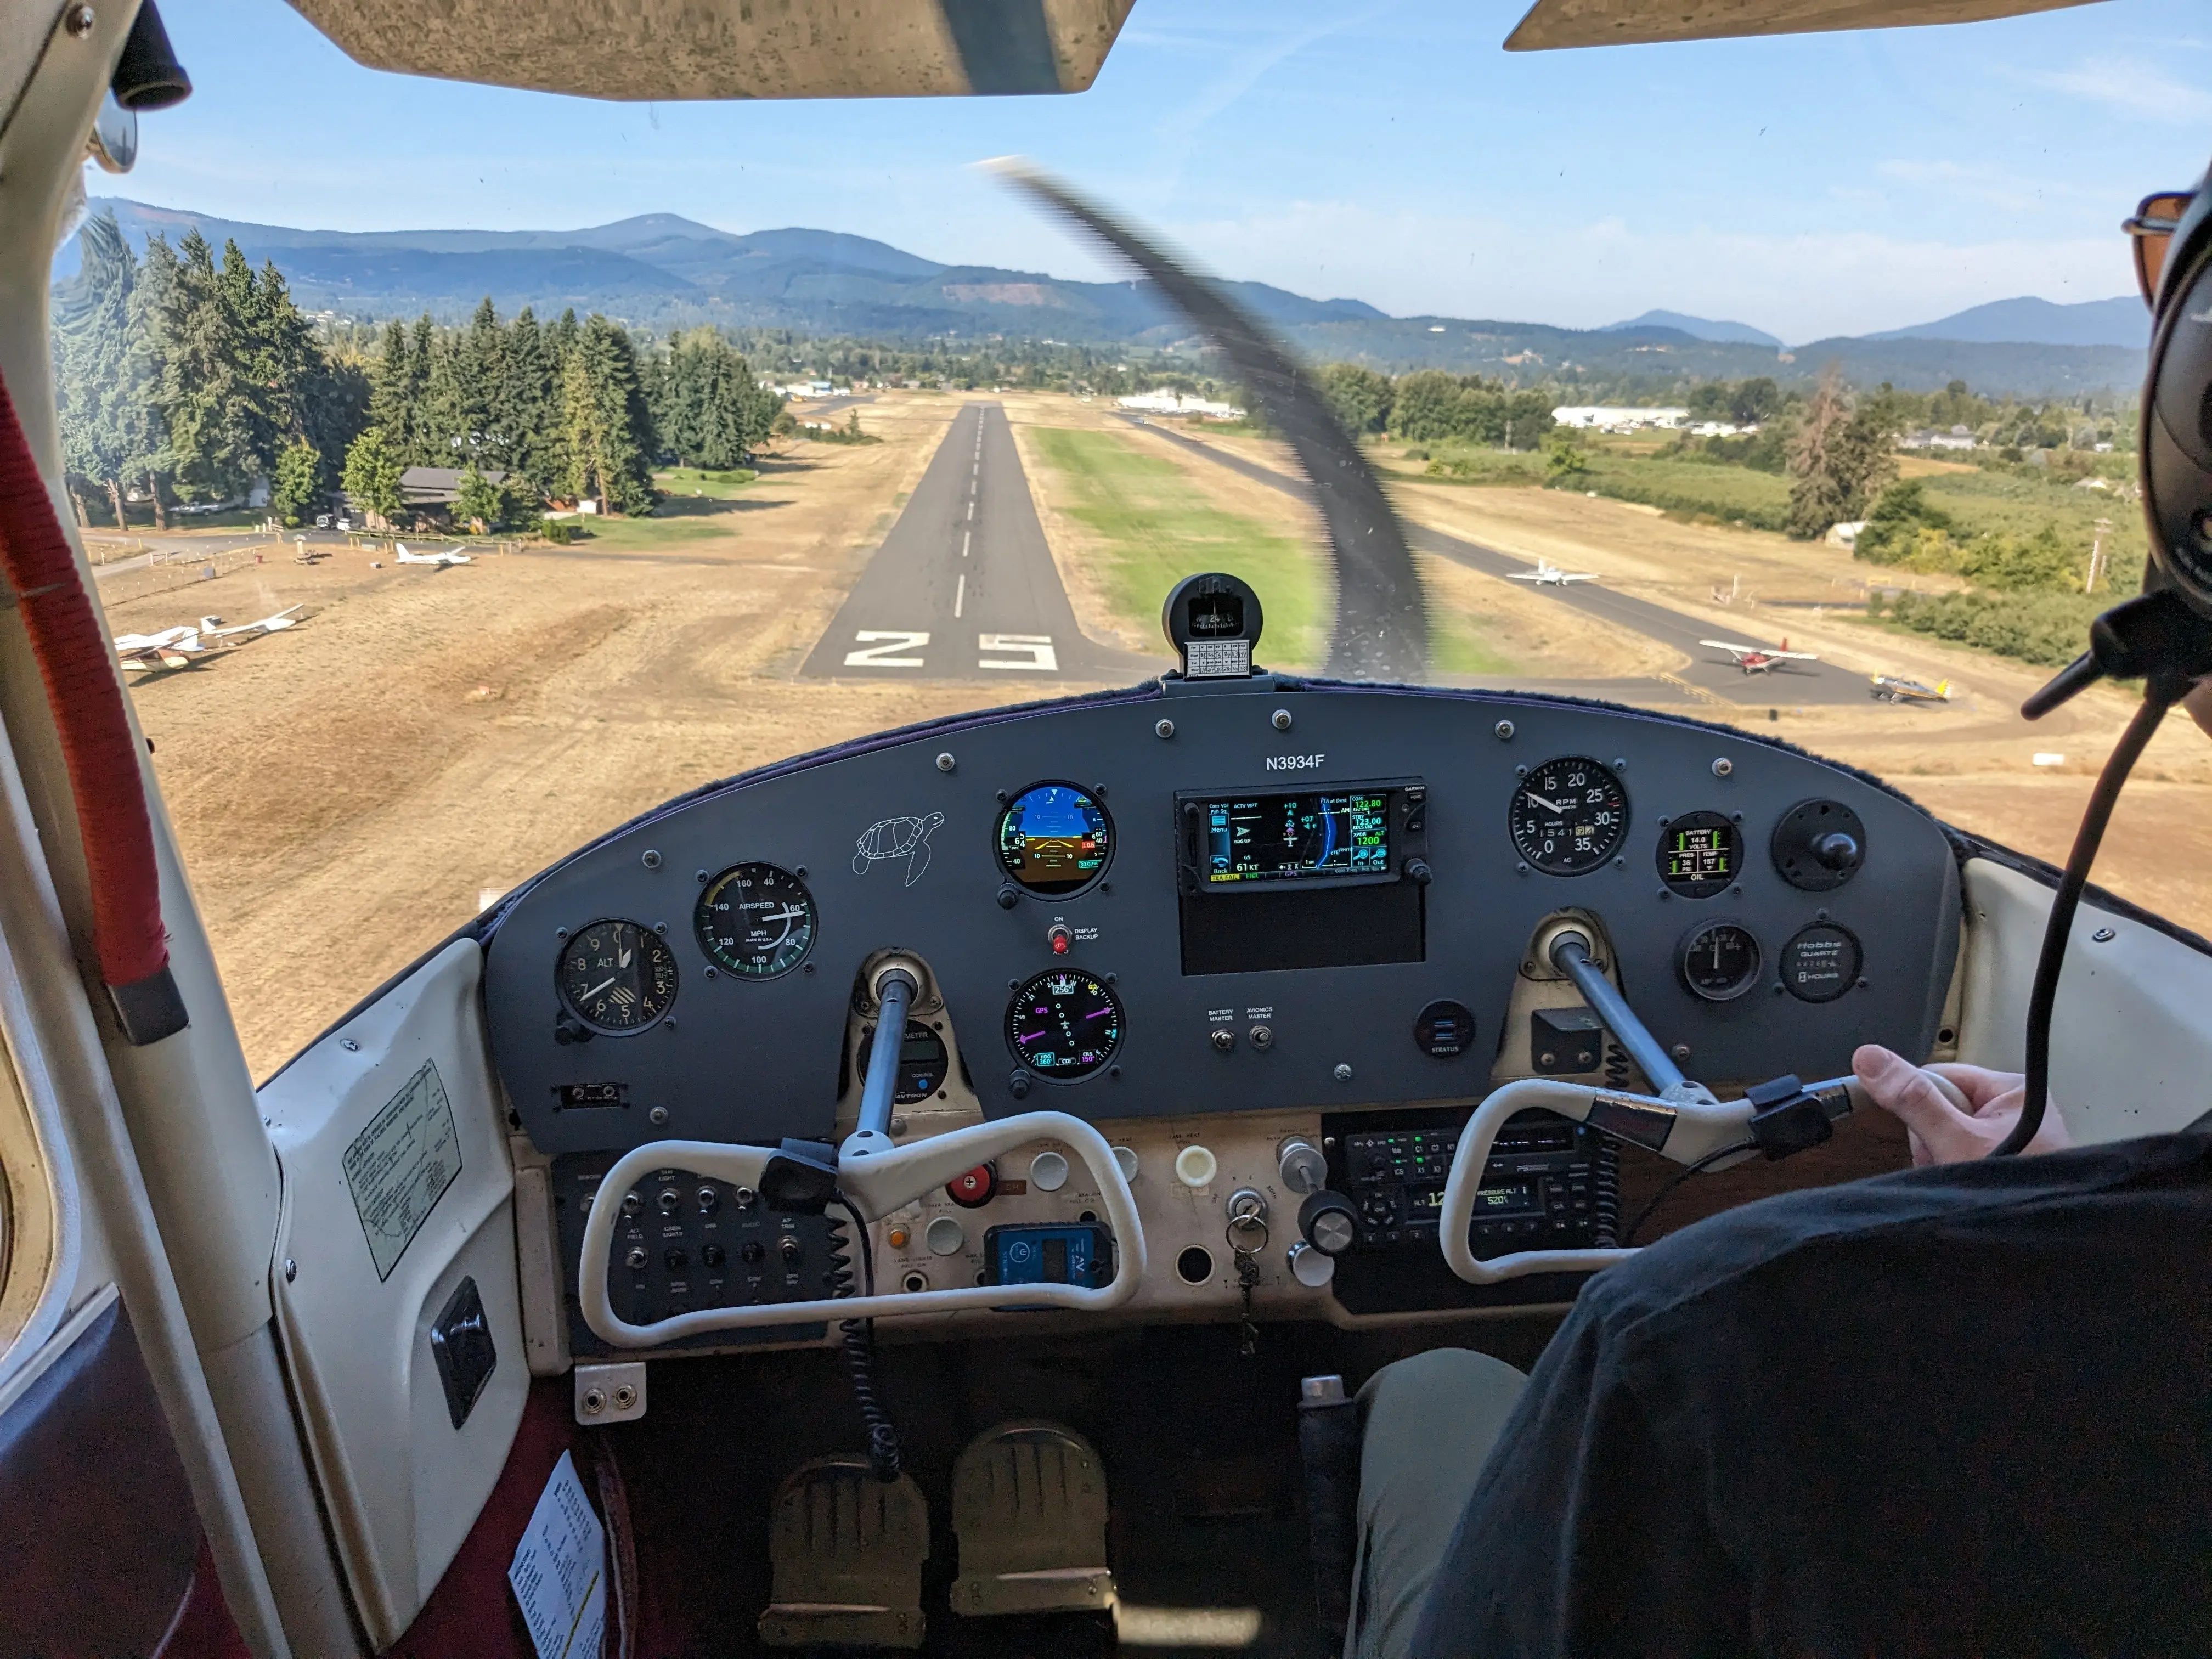 GWA's Cessna 172 landing on Hood River Airport's paved runway. The grass runway is also visible. The view is from inside of the 172's cockpit.